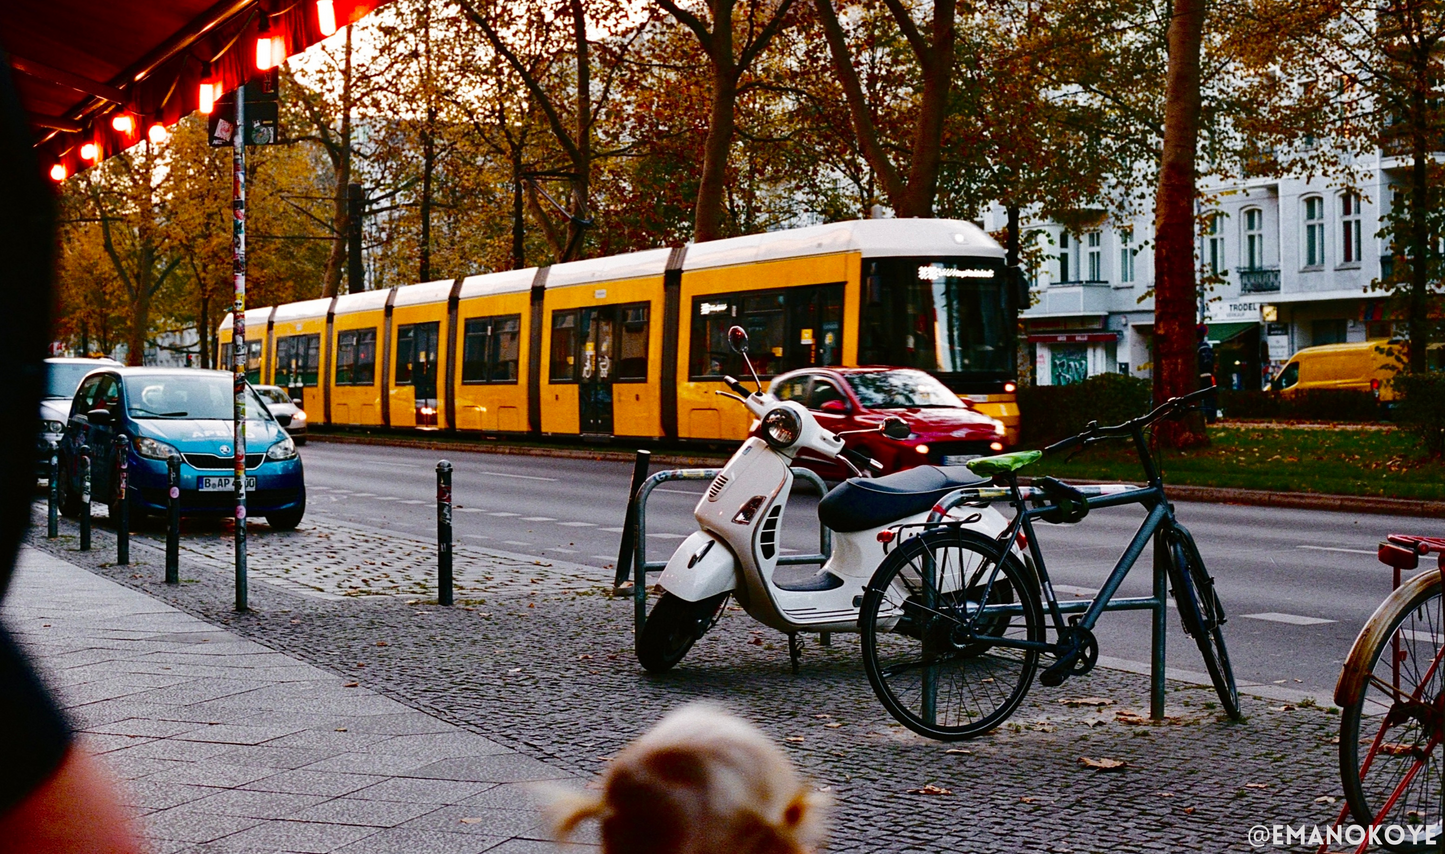 a vespa chained up to a bike rack with a yellow city tram in the background